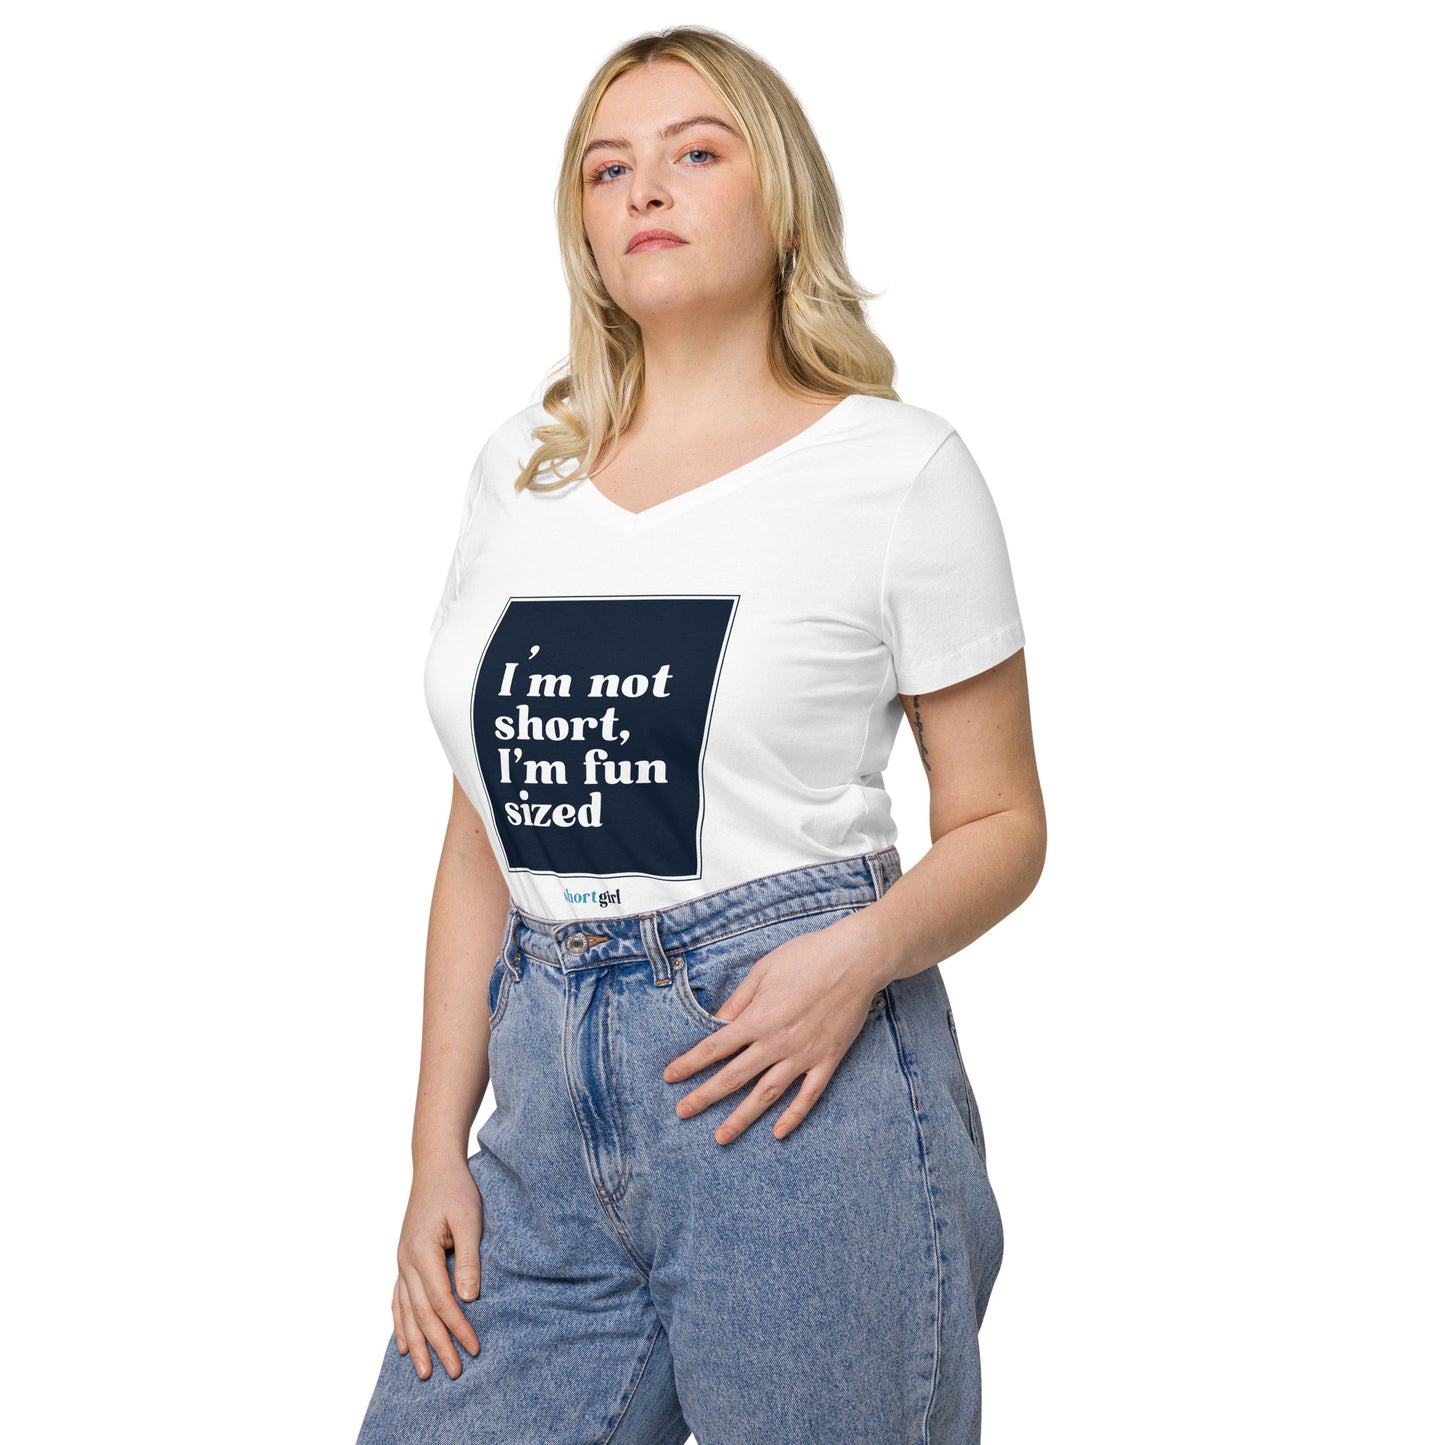 Women’s fitted v-neck t-shirt - I'm not short, I'm fun sized